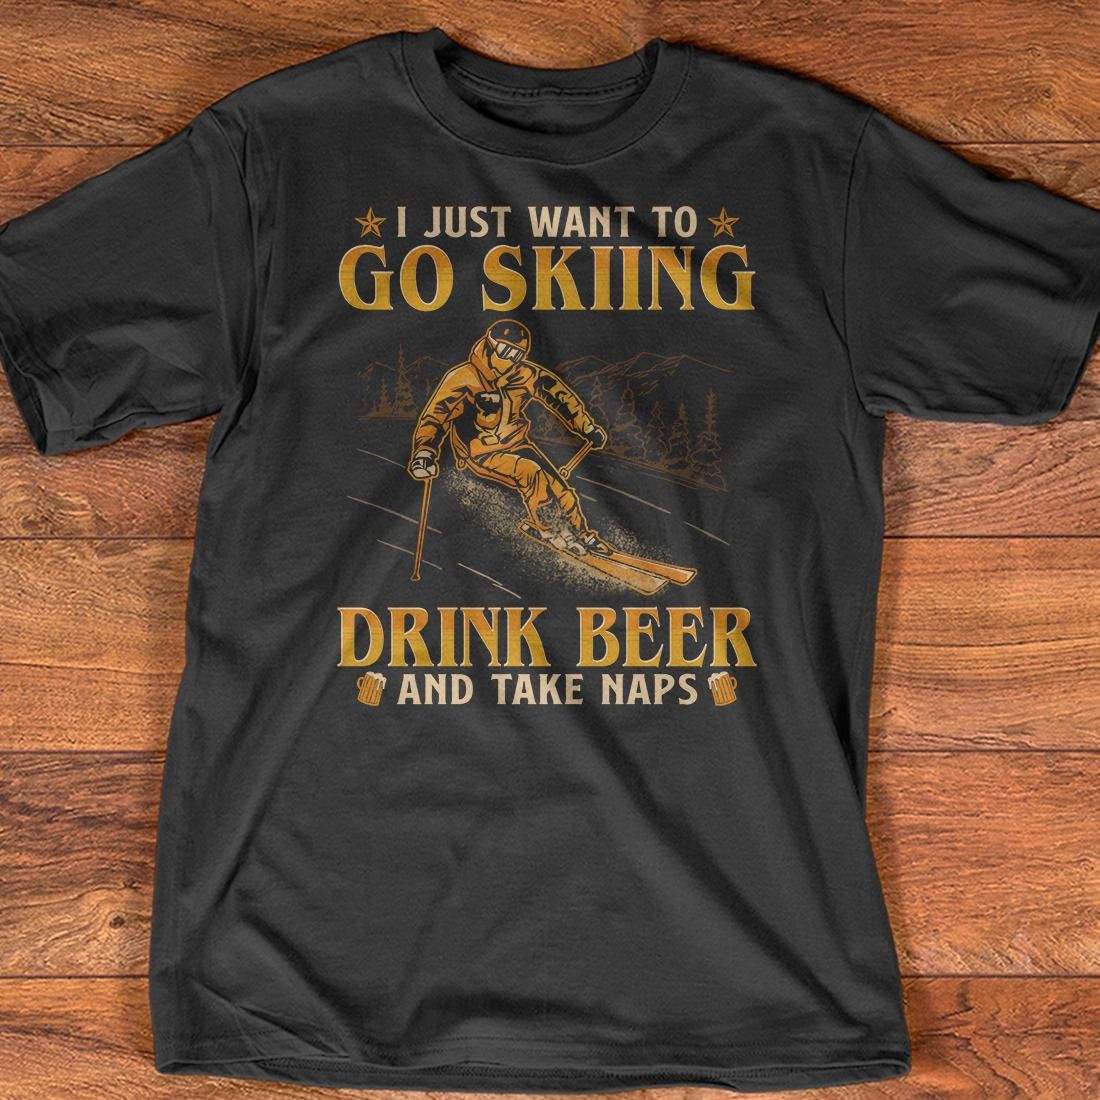 Man Love Skiing And Beer - I just want to go skiing drink beer and take naps